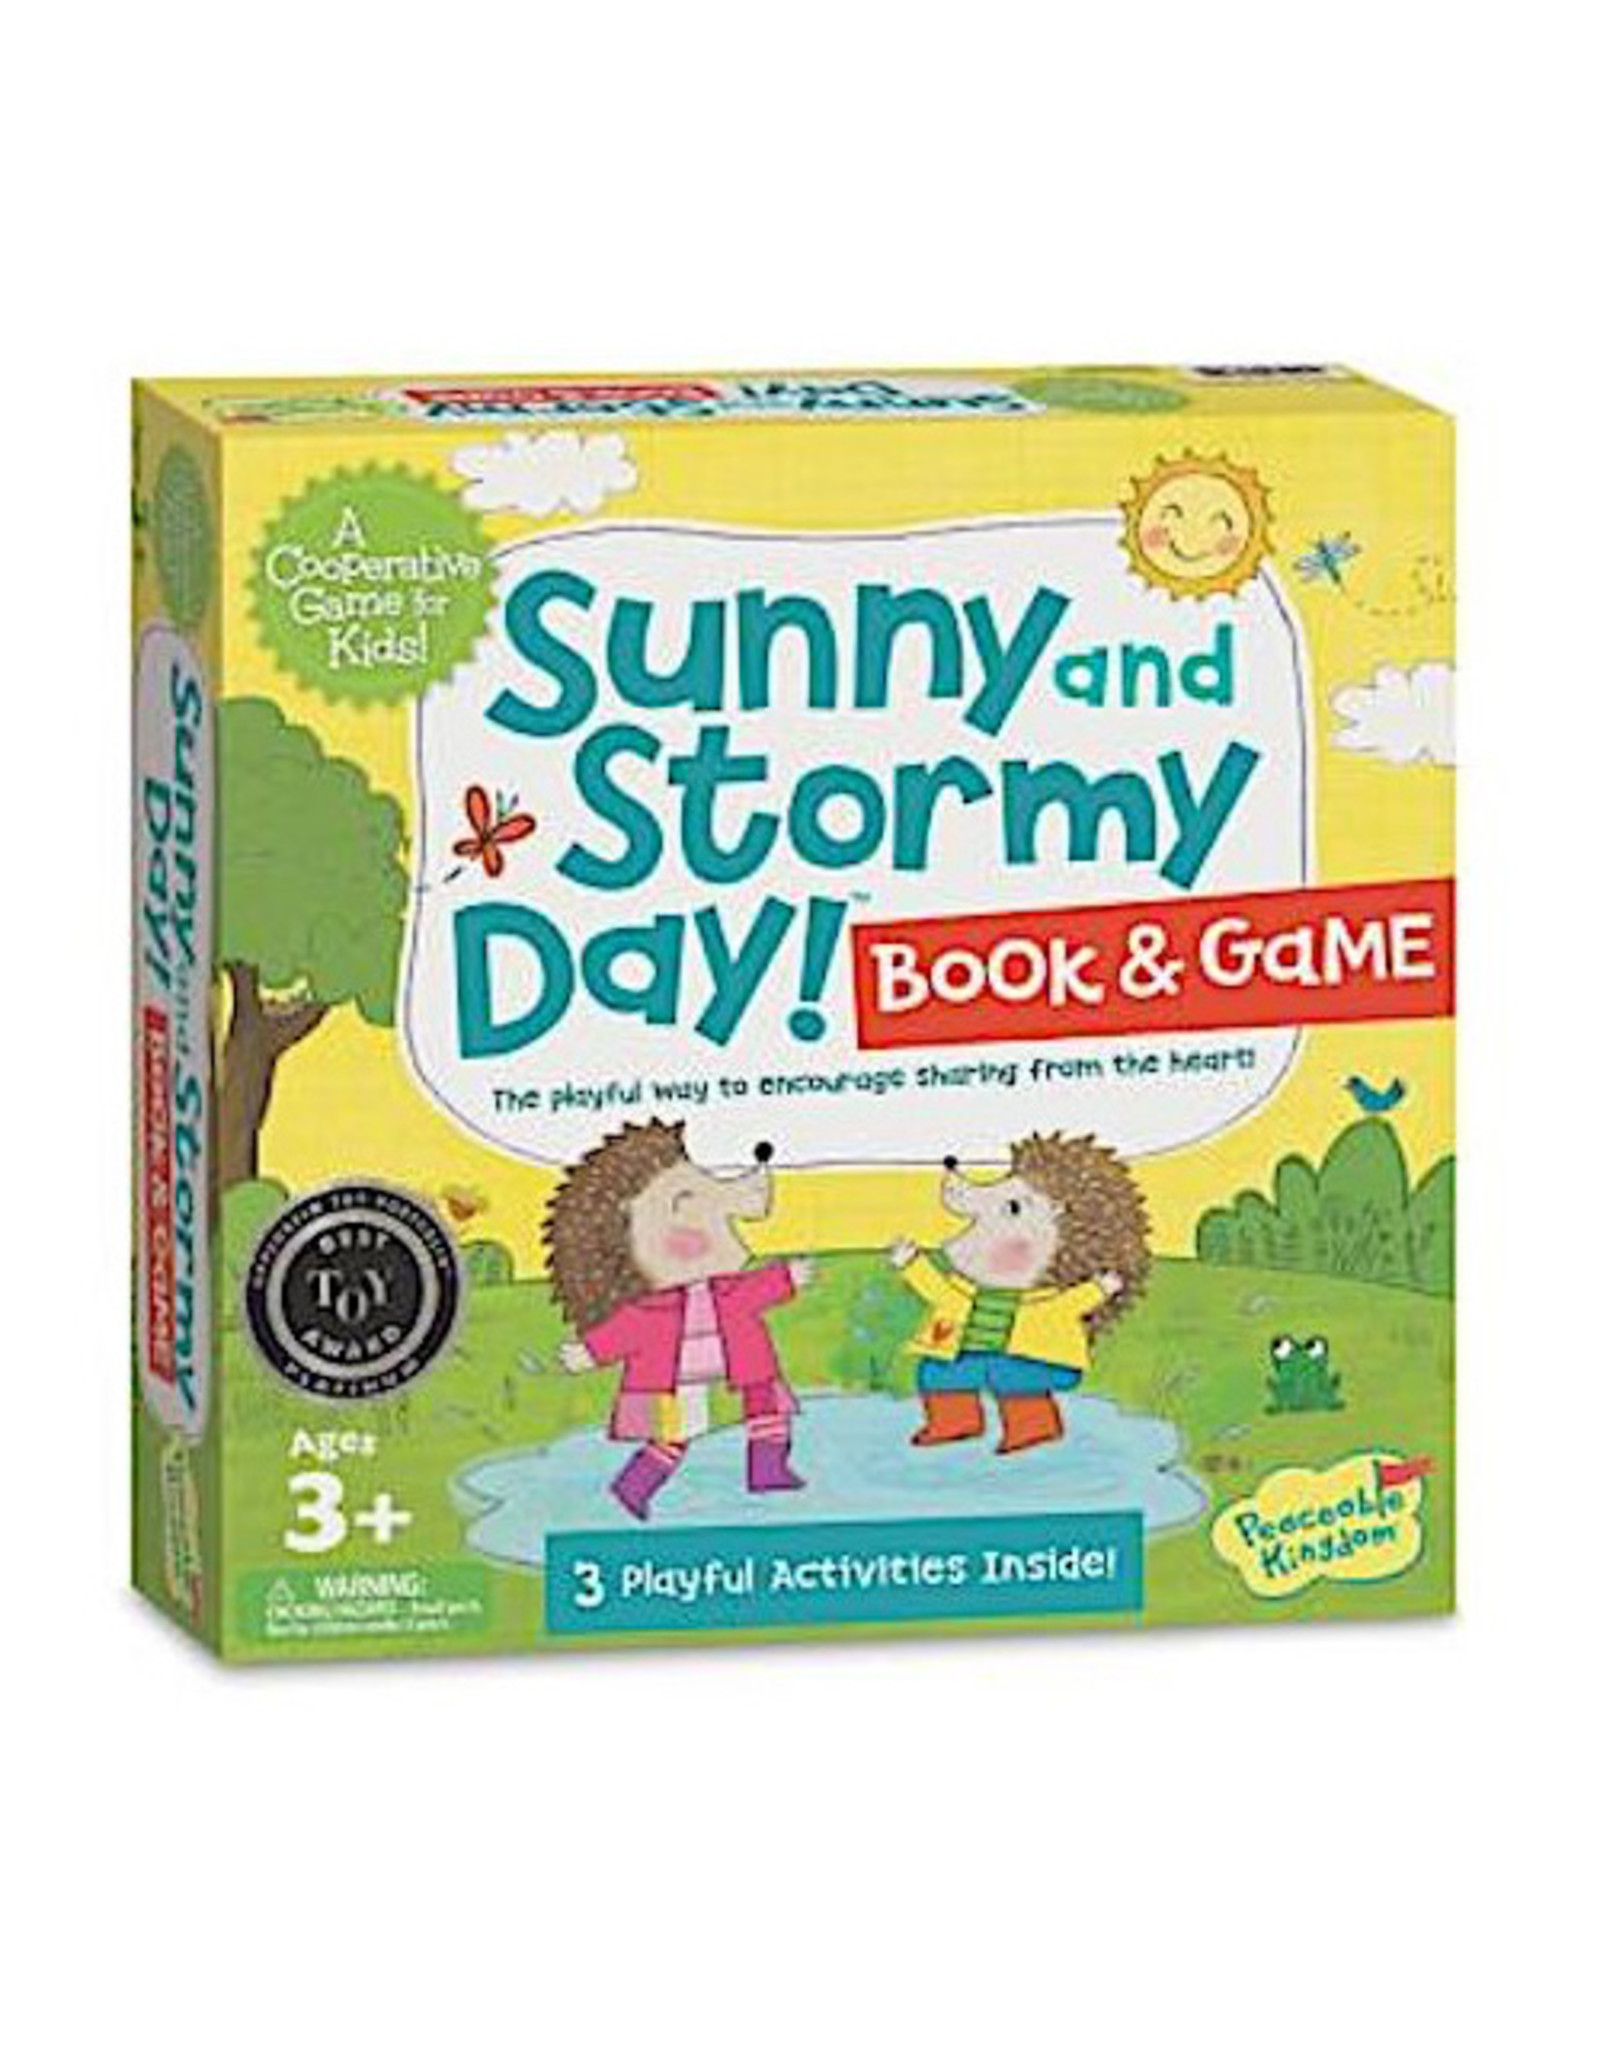 Sunny And Stormy Day!